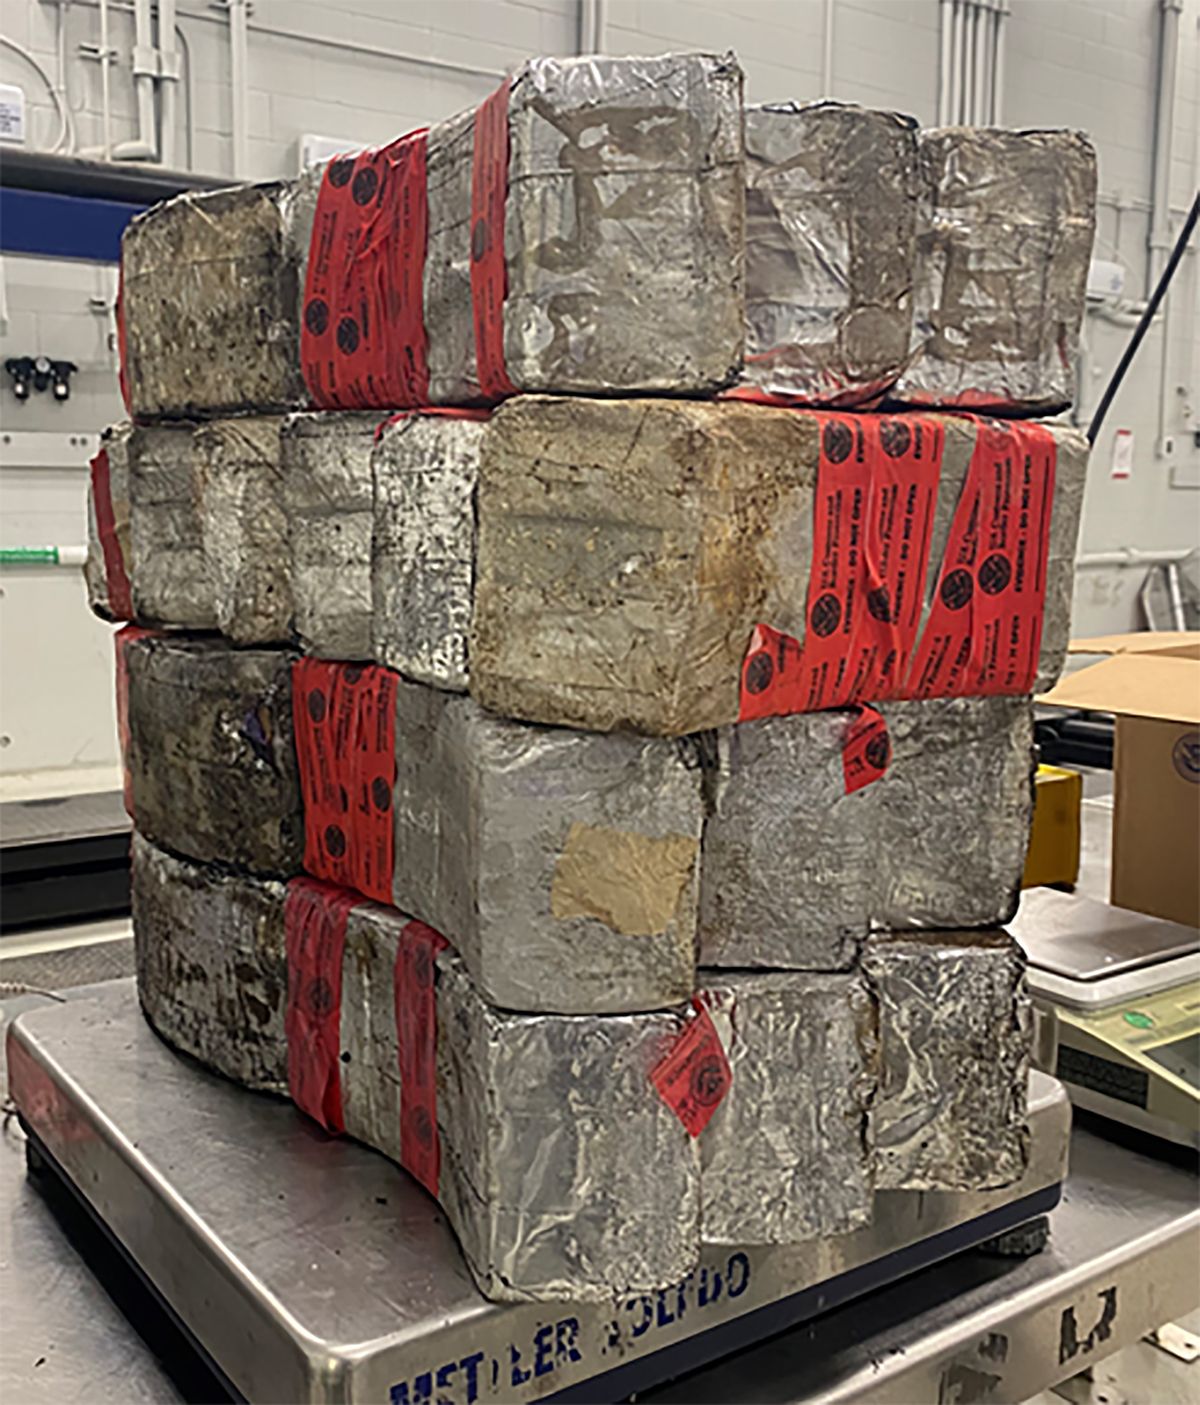 This undated photo provided by the U.S. Customs and Border Protection shows seized drug bundles containing 132 pounds of methamphetamine on display from Feb. 25, 2021, at the Laredo port of entry. The drugs were concealed in a vehicle driven by 23-year-old U.S. citizen traveling from Mexico. Since the start of the coronavirus pandemic, an increasing number of U.S. citizens have been apprehended while they have tried to smuggle illegal drugs at the Southwest border.  (HOGP)